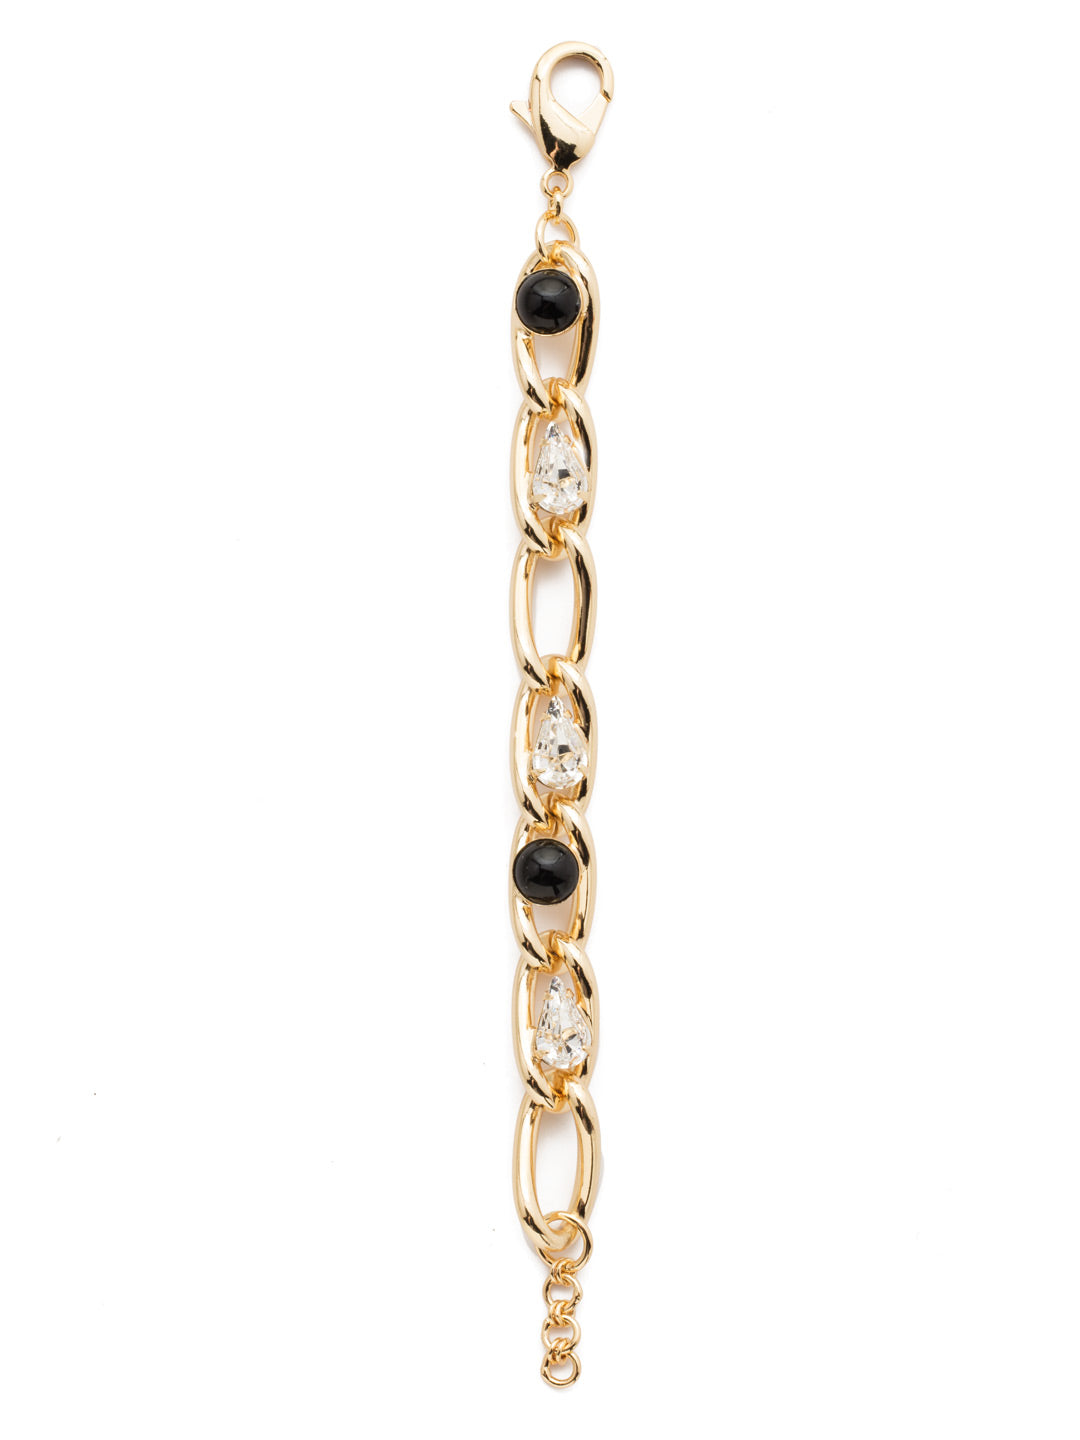 Roxanne Tennis Bracelet - 4BEP7BGJET - <p>Love the chainlink look? Try the Roxanne Tennis Bracelet on for size. Metal links are adorned with drops of pear crystals and more in this charming piece. From Sorrelli's Jet collection in our Bright Gold-tone finish.</p>